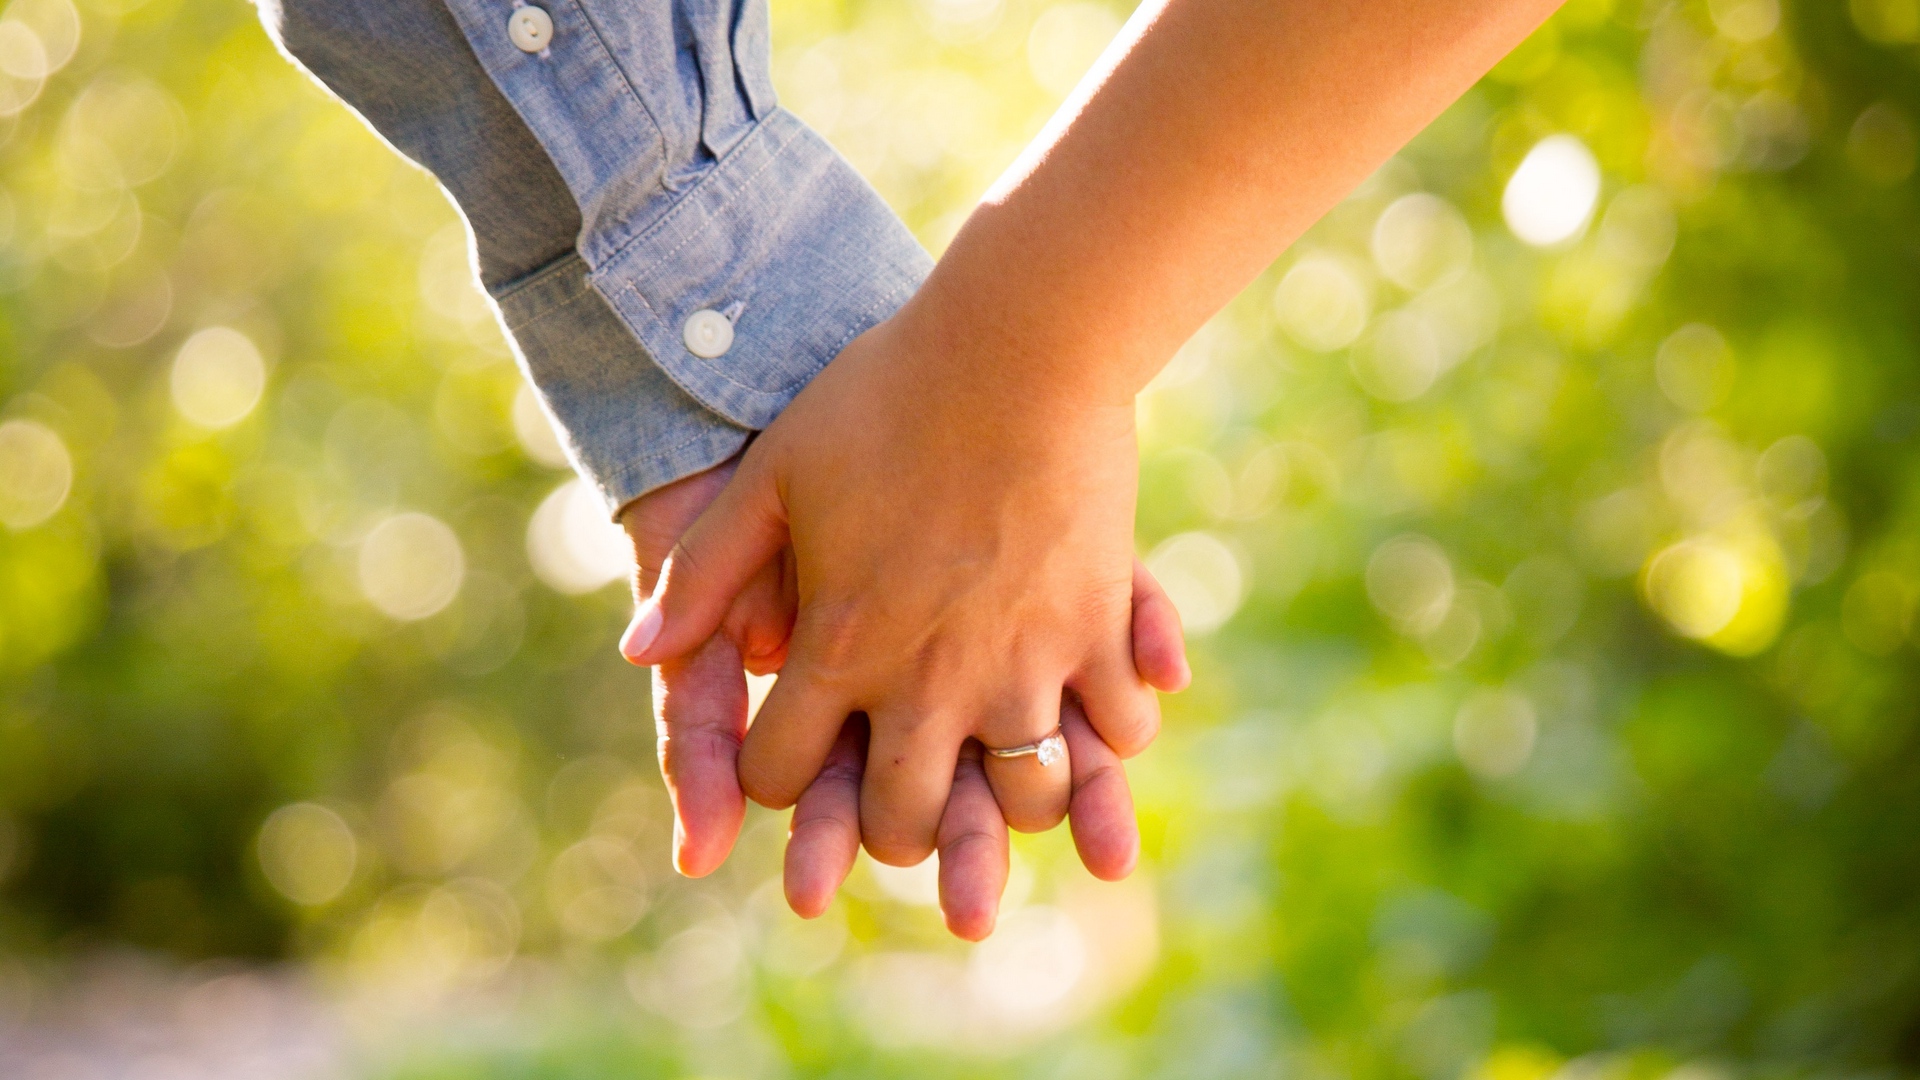 husband wife wallpaper,people in nature,holding hands,hand,gesture,yellow